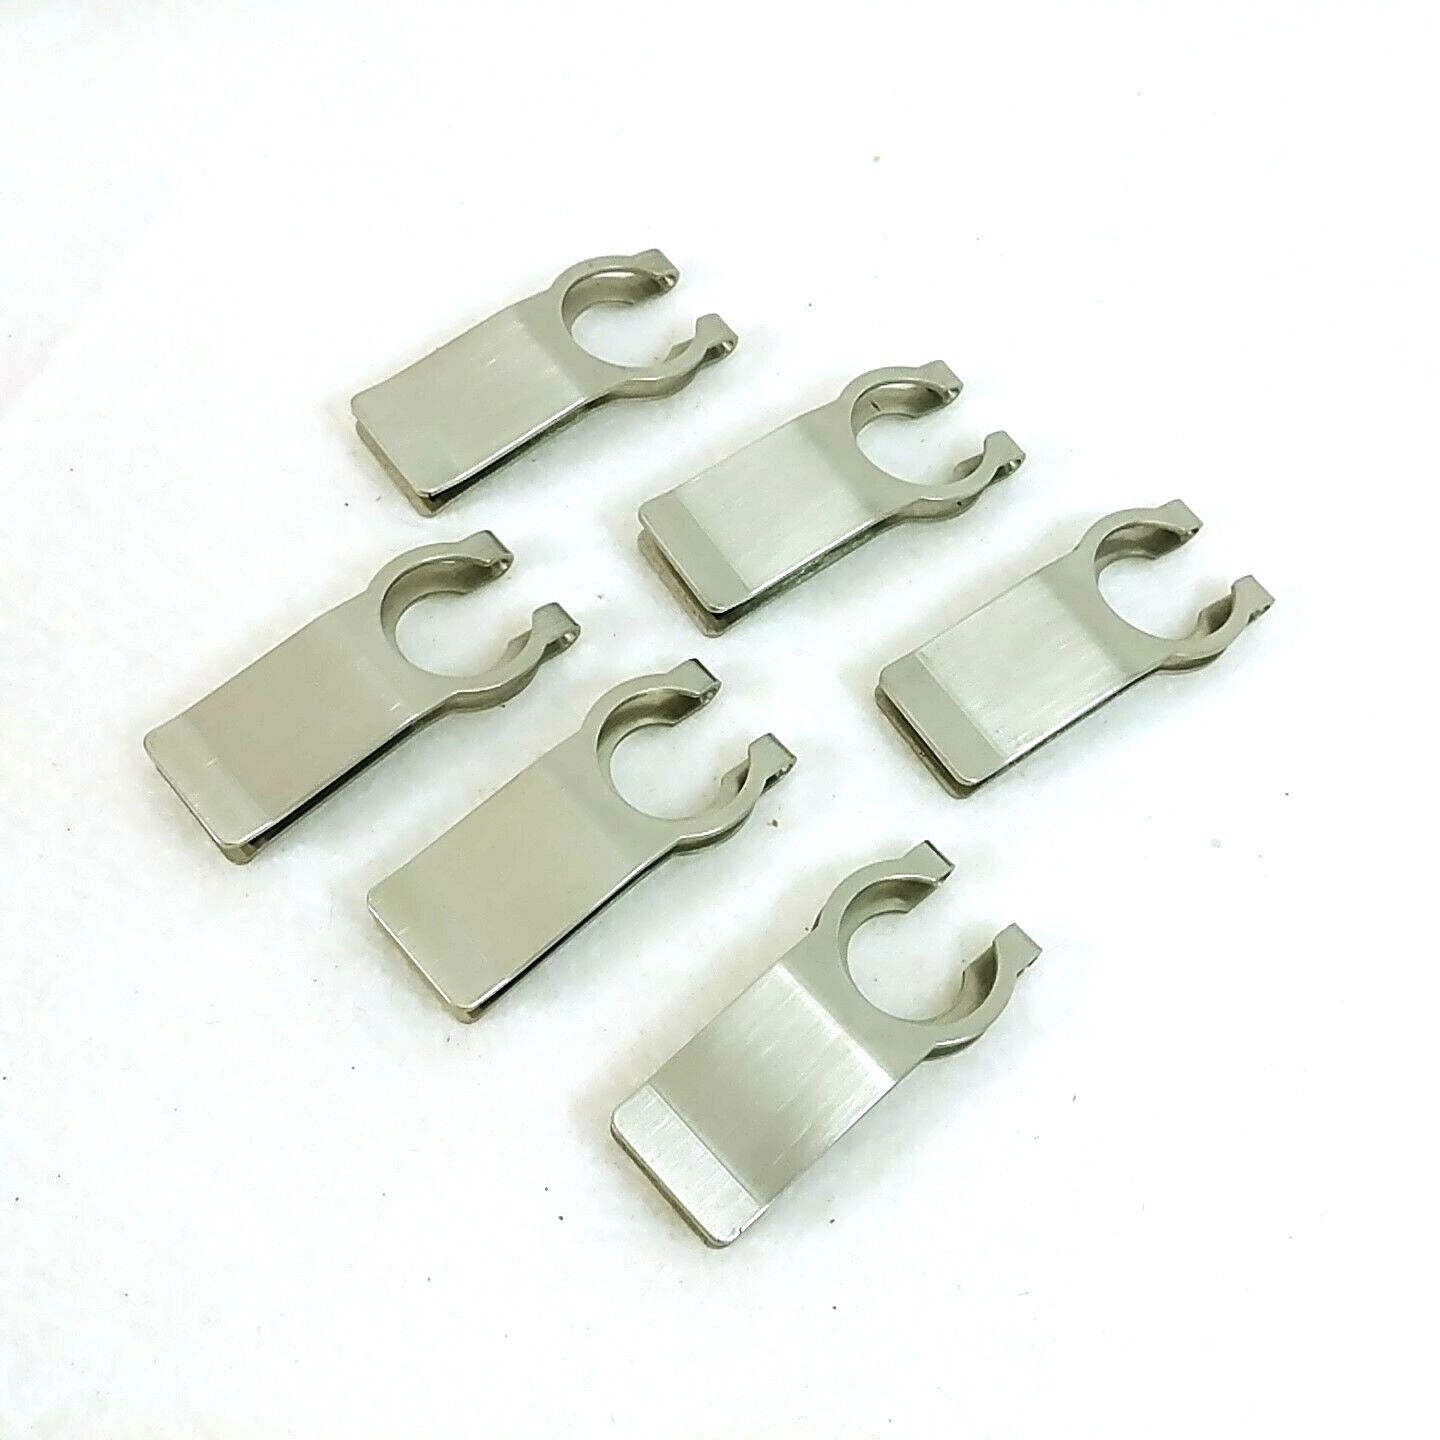 Stemware Plate Clips Set of 6 Original Box Metalla Stainless Steel Partyware